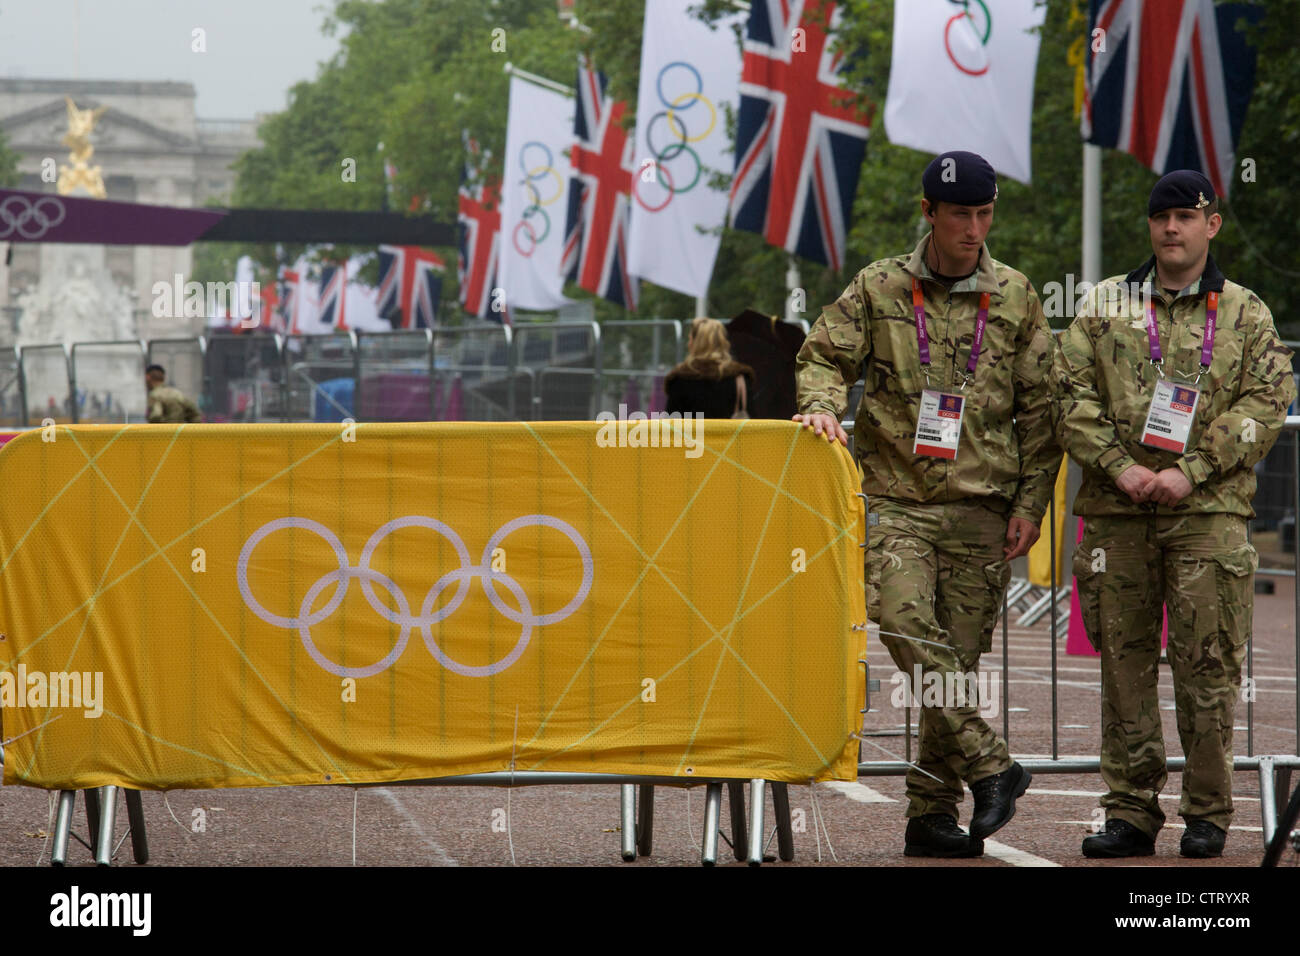 Soldiers the Royal Artillery regiment in the British army stand guarding the entrance to the volleyball venue in central London next to the IOC rings logo on day 4 of the London 2012 Olympic Games. A further 1,200 military personnel are being deployed to help secure the 2012 Olympics in London following the failure by security contractor G4S to provide enough private guards. The extra personnel have been drafted in amid continuing fears that the private security contractor's handling of the £284m contract remains a risk to the Games. Stock Photo